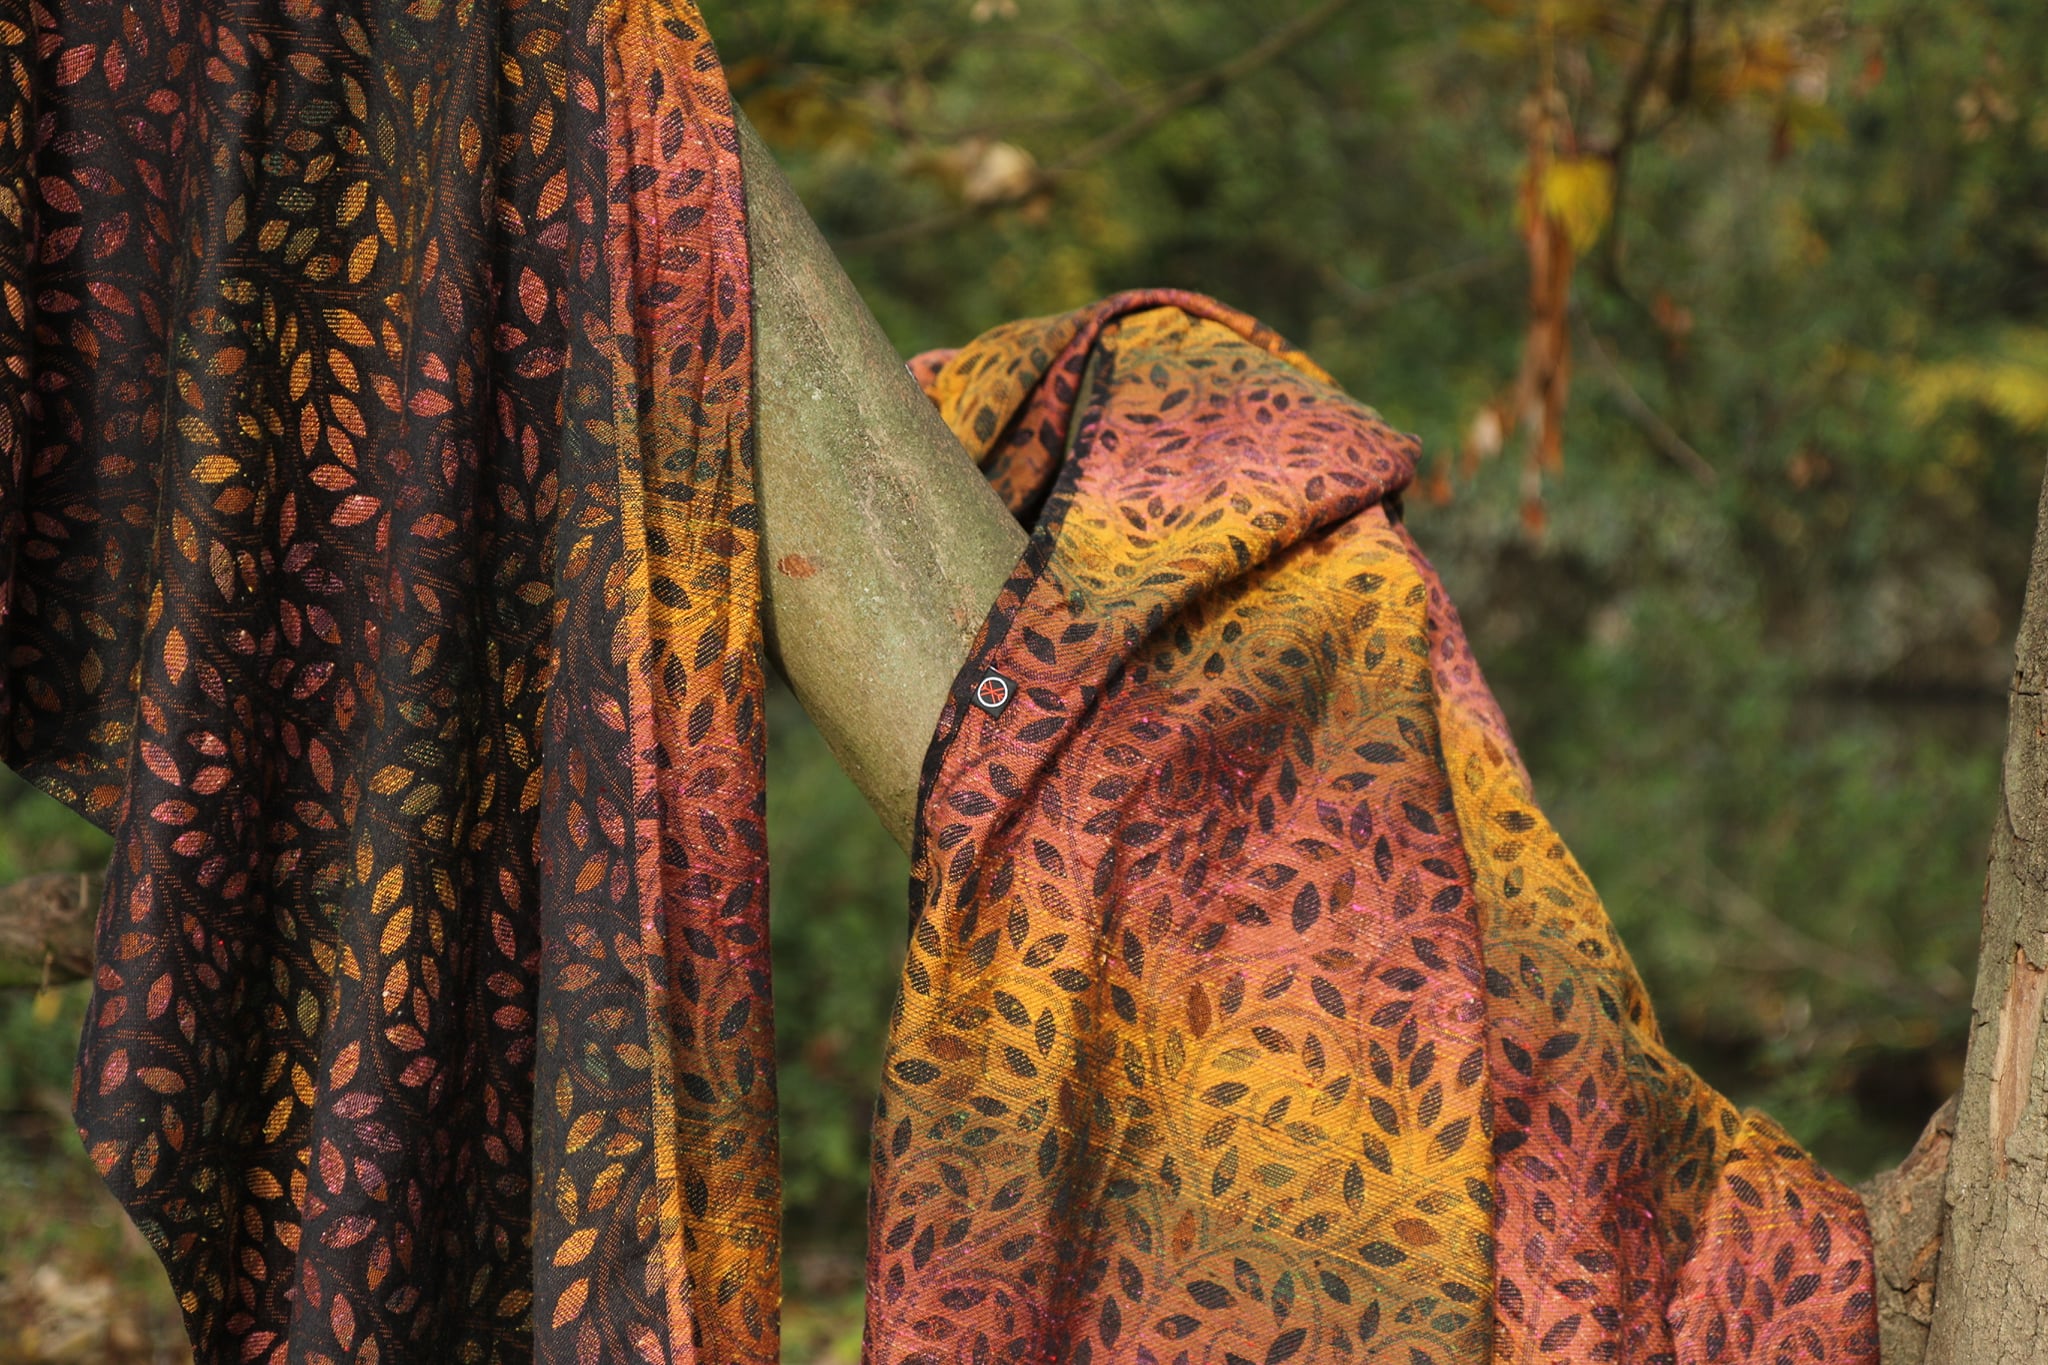 Solnce Eos Drums of Autumn Wrap (viscose, tussah, seaweed) Image